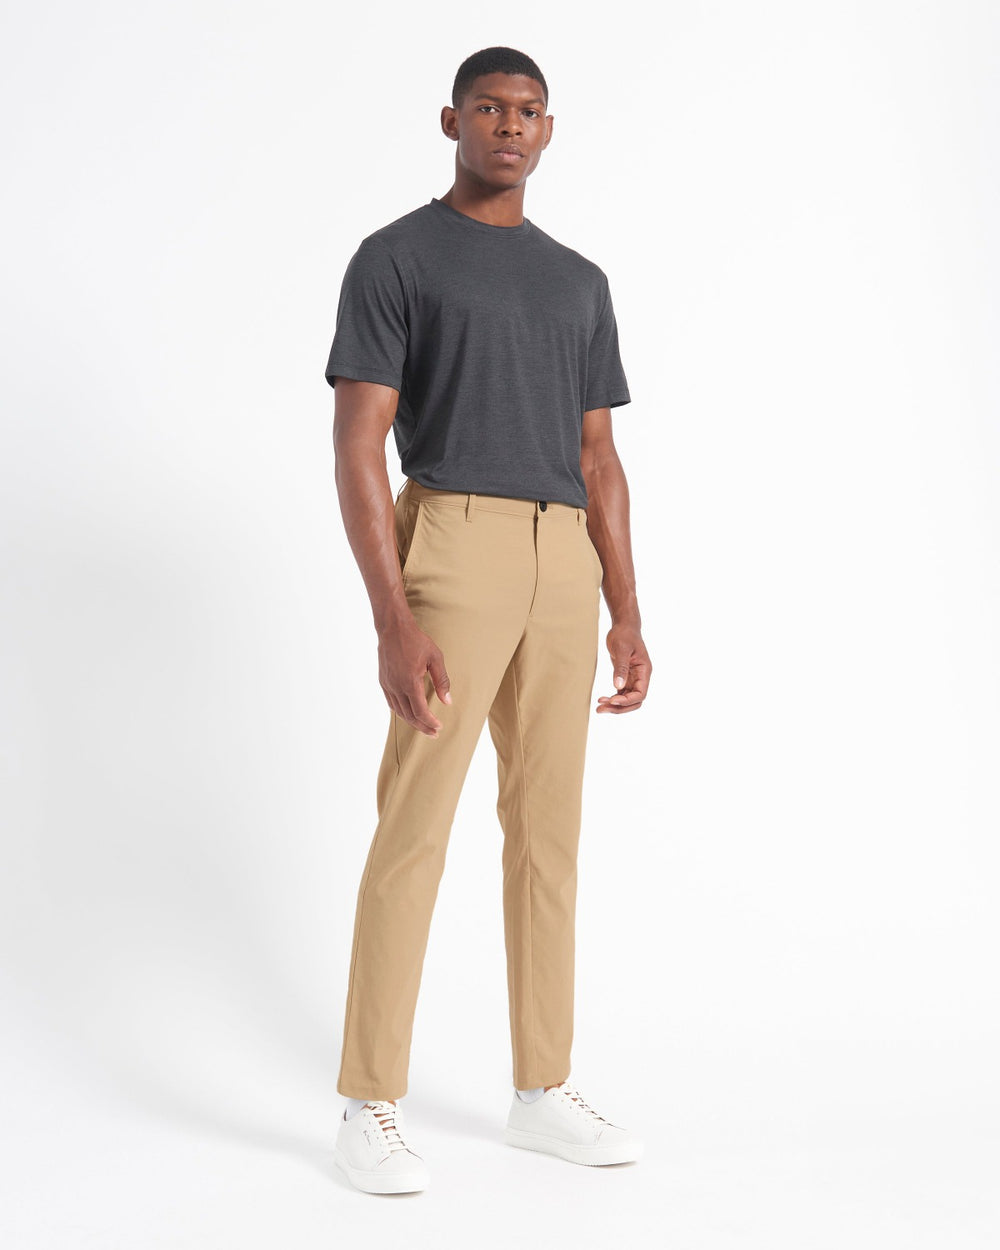 18 Best Mens Khaki Pants To Complete Your Wardrobe in 2023  FashionBeans